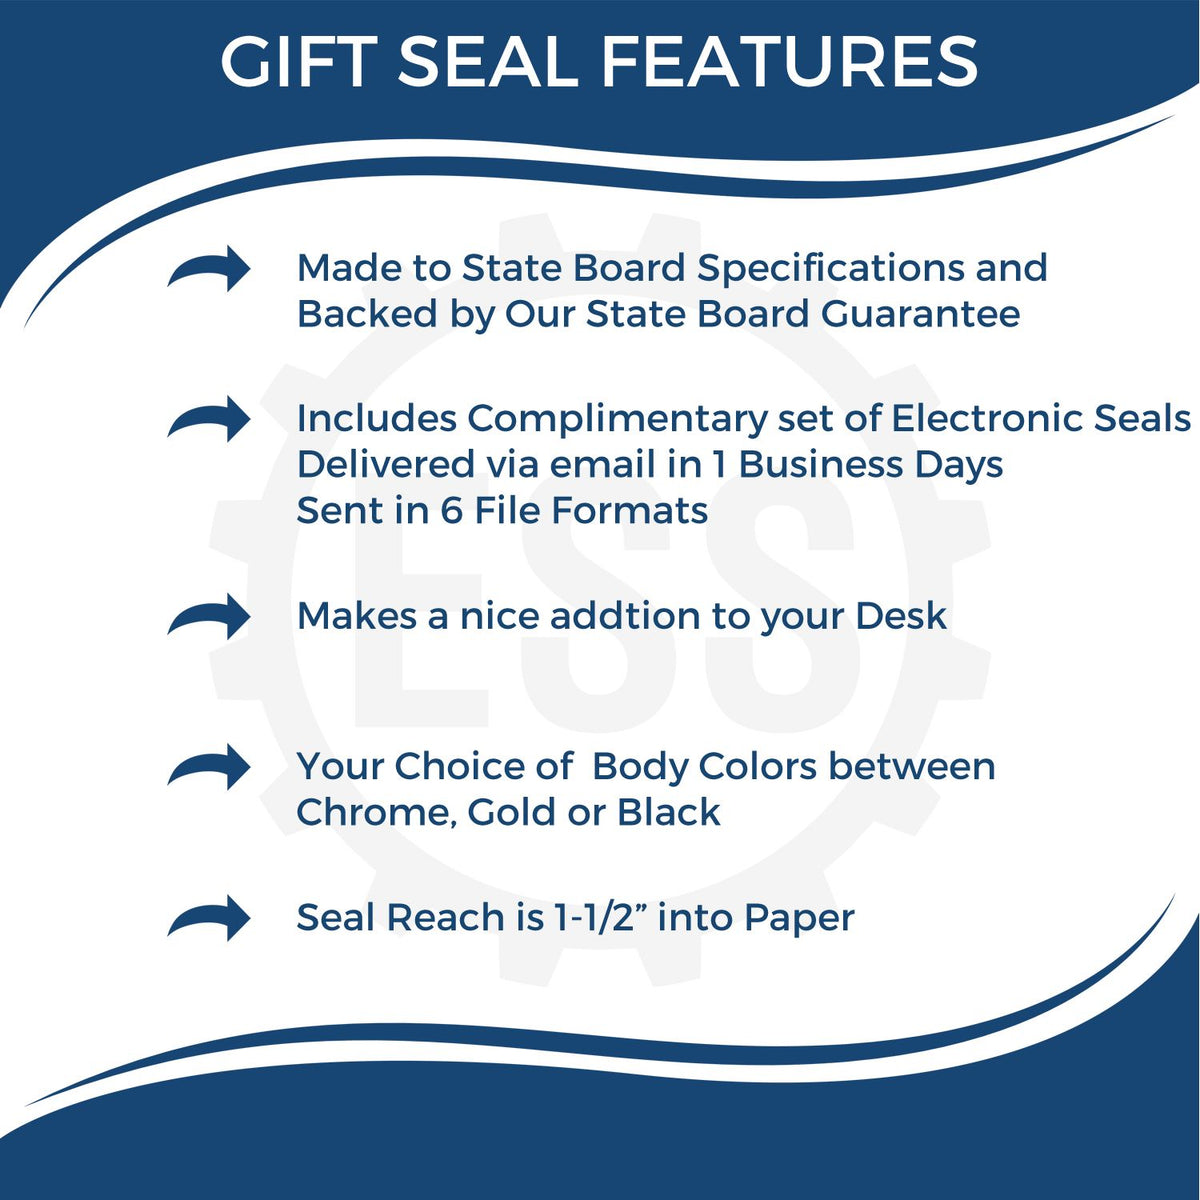 A picture of an infographic highlighting the selling points for the Gift Kentucky Land Surveyor Seal